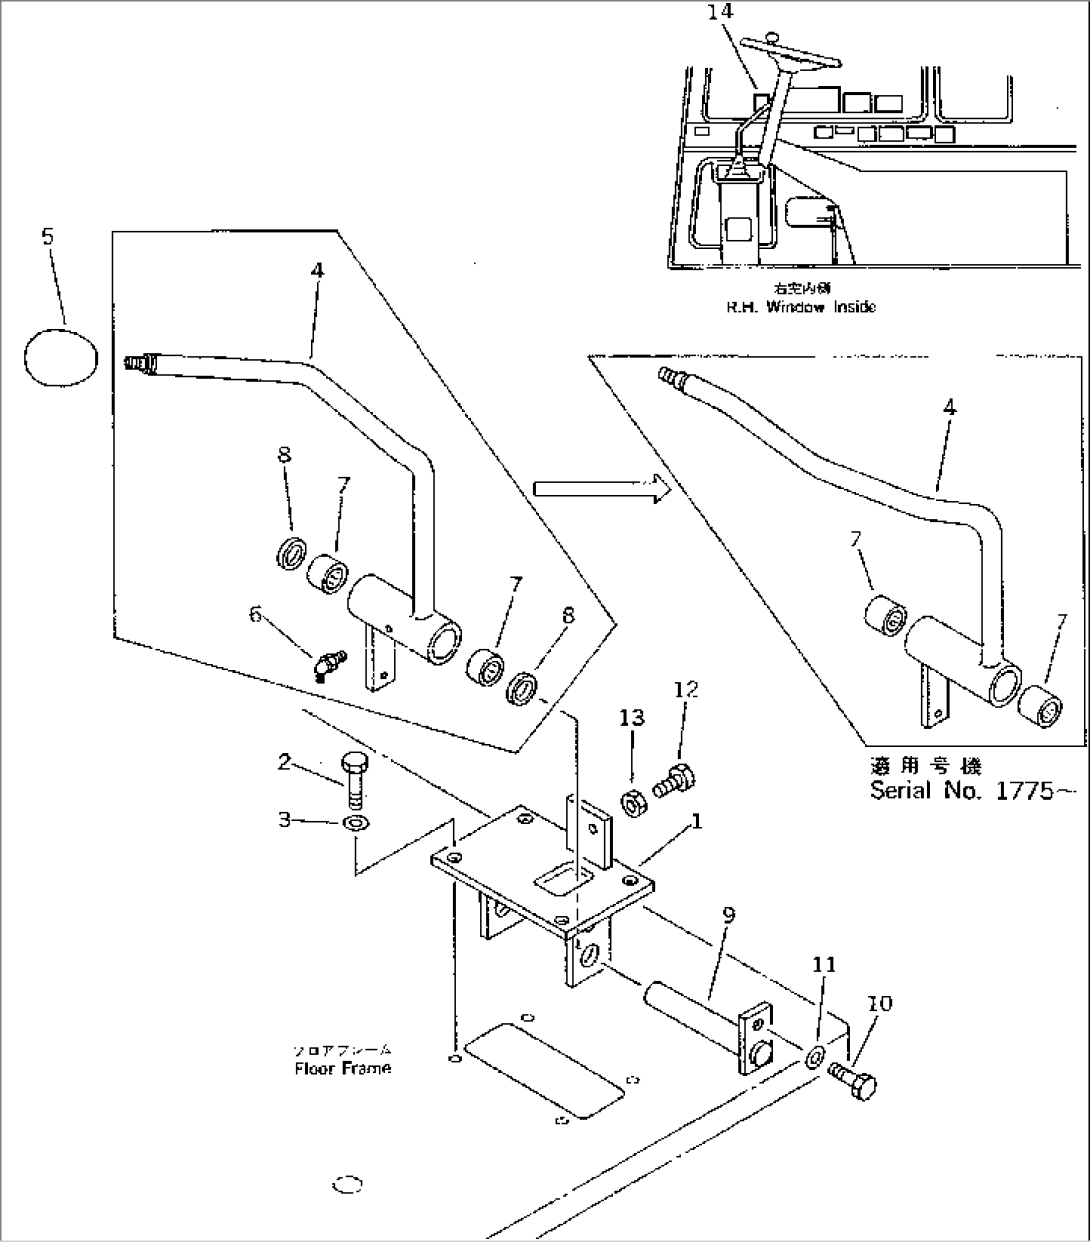 BLADE CONTROL LEVER AND LINKAGE (1/2)